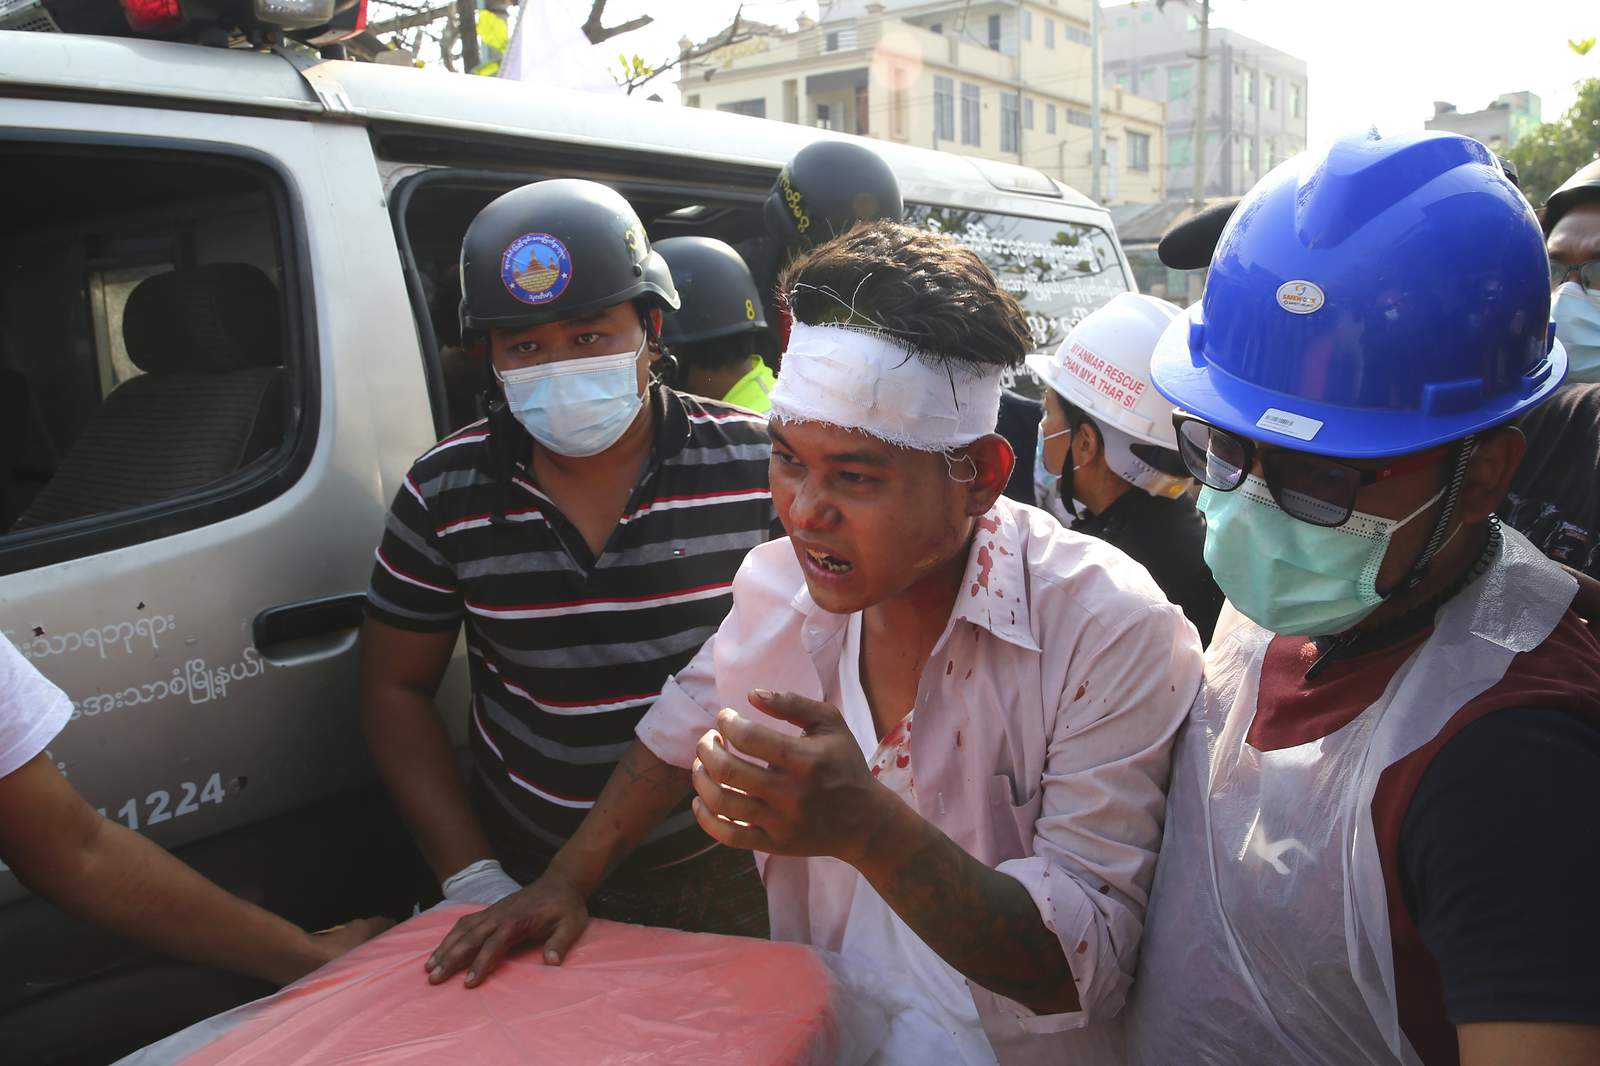 Myanmar cracked down brutally on protests. It may get worse.